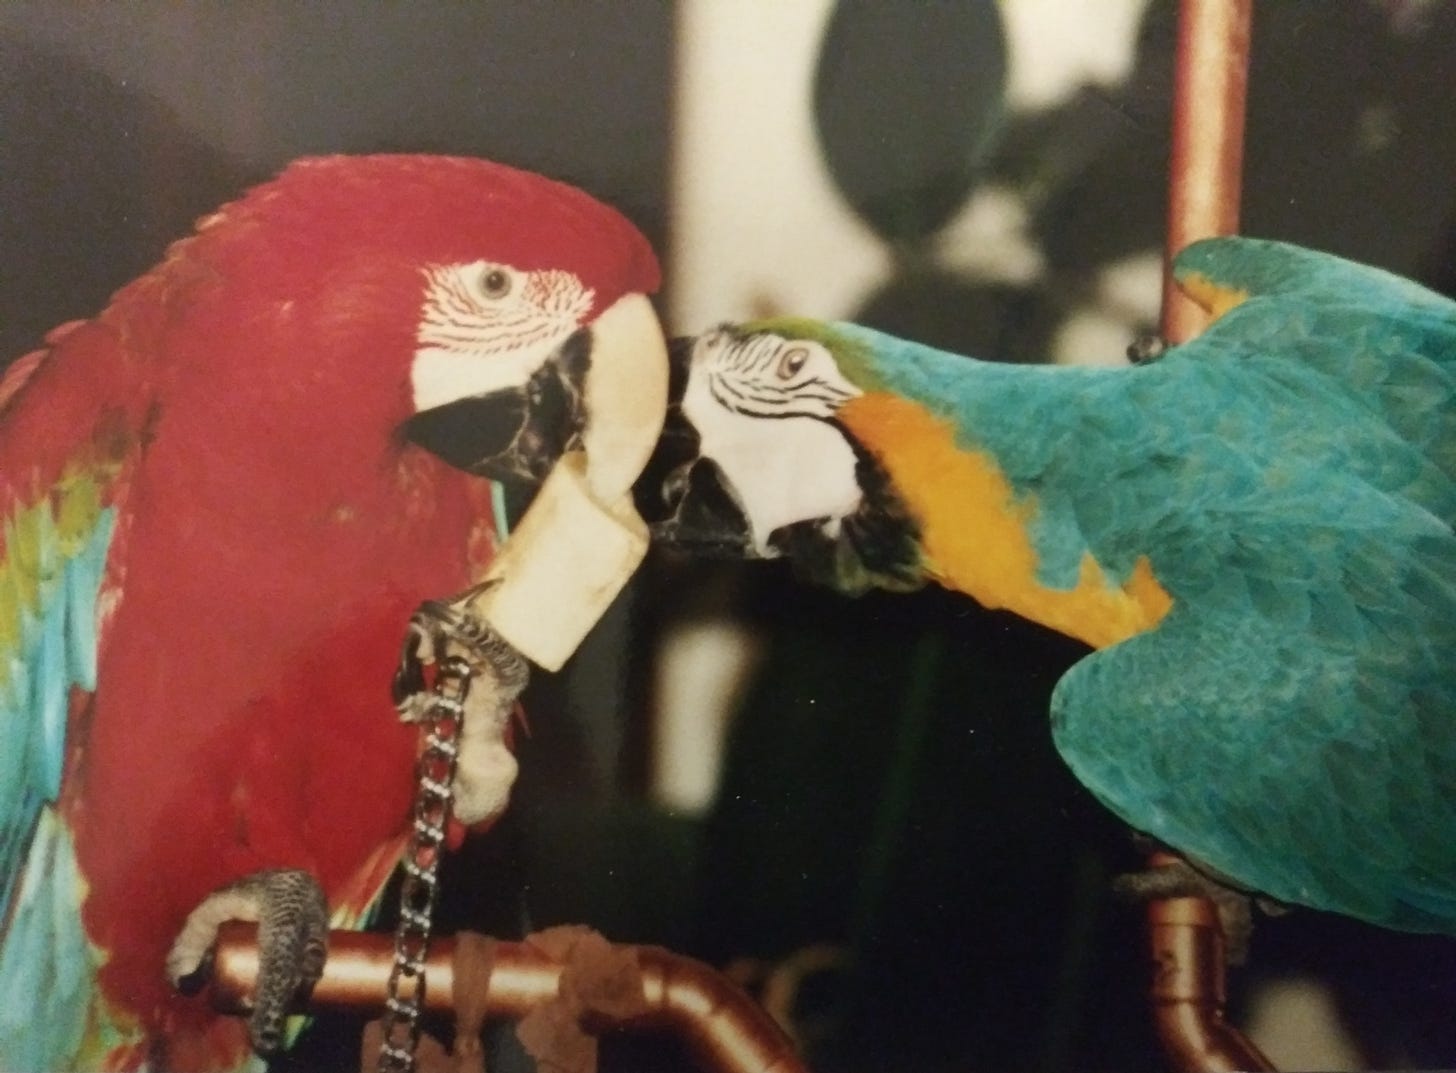 Green wing macaw, Rocket on left with toy. Blue and Gold, Kiroc, on right trying to take it from Rocket.